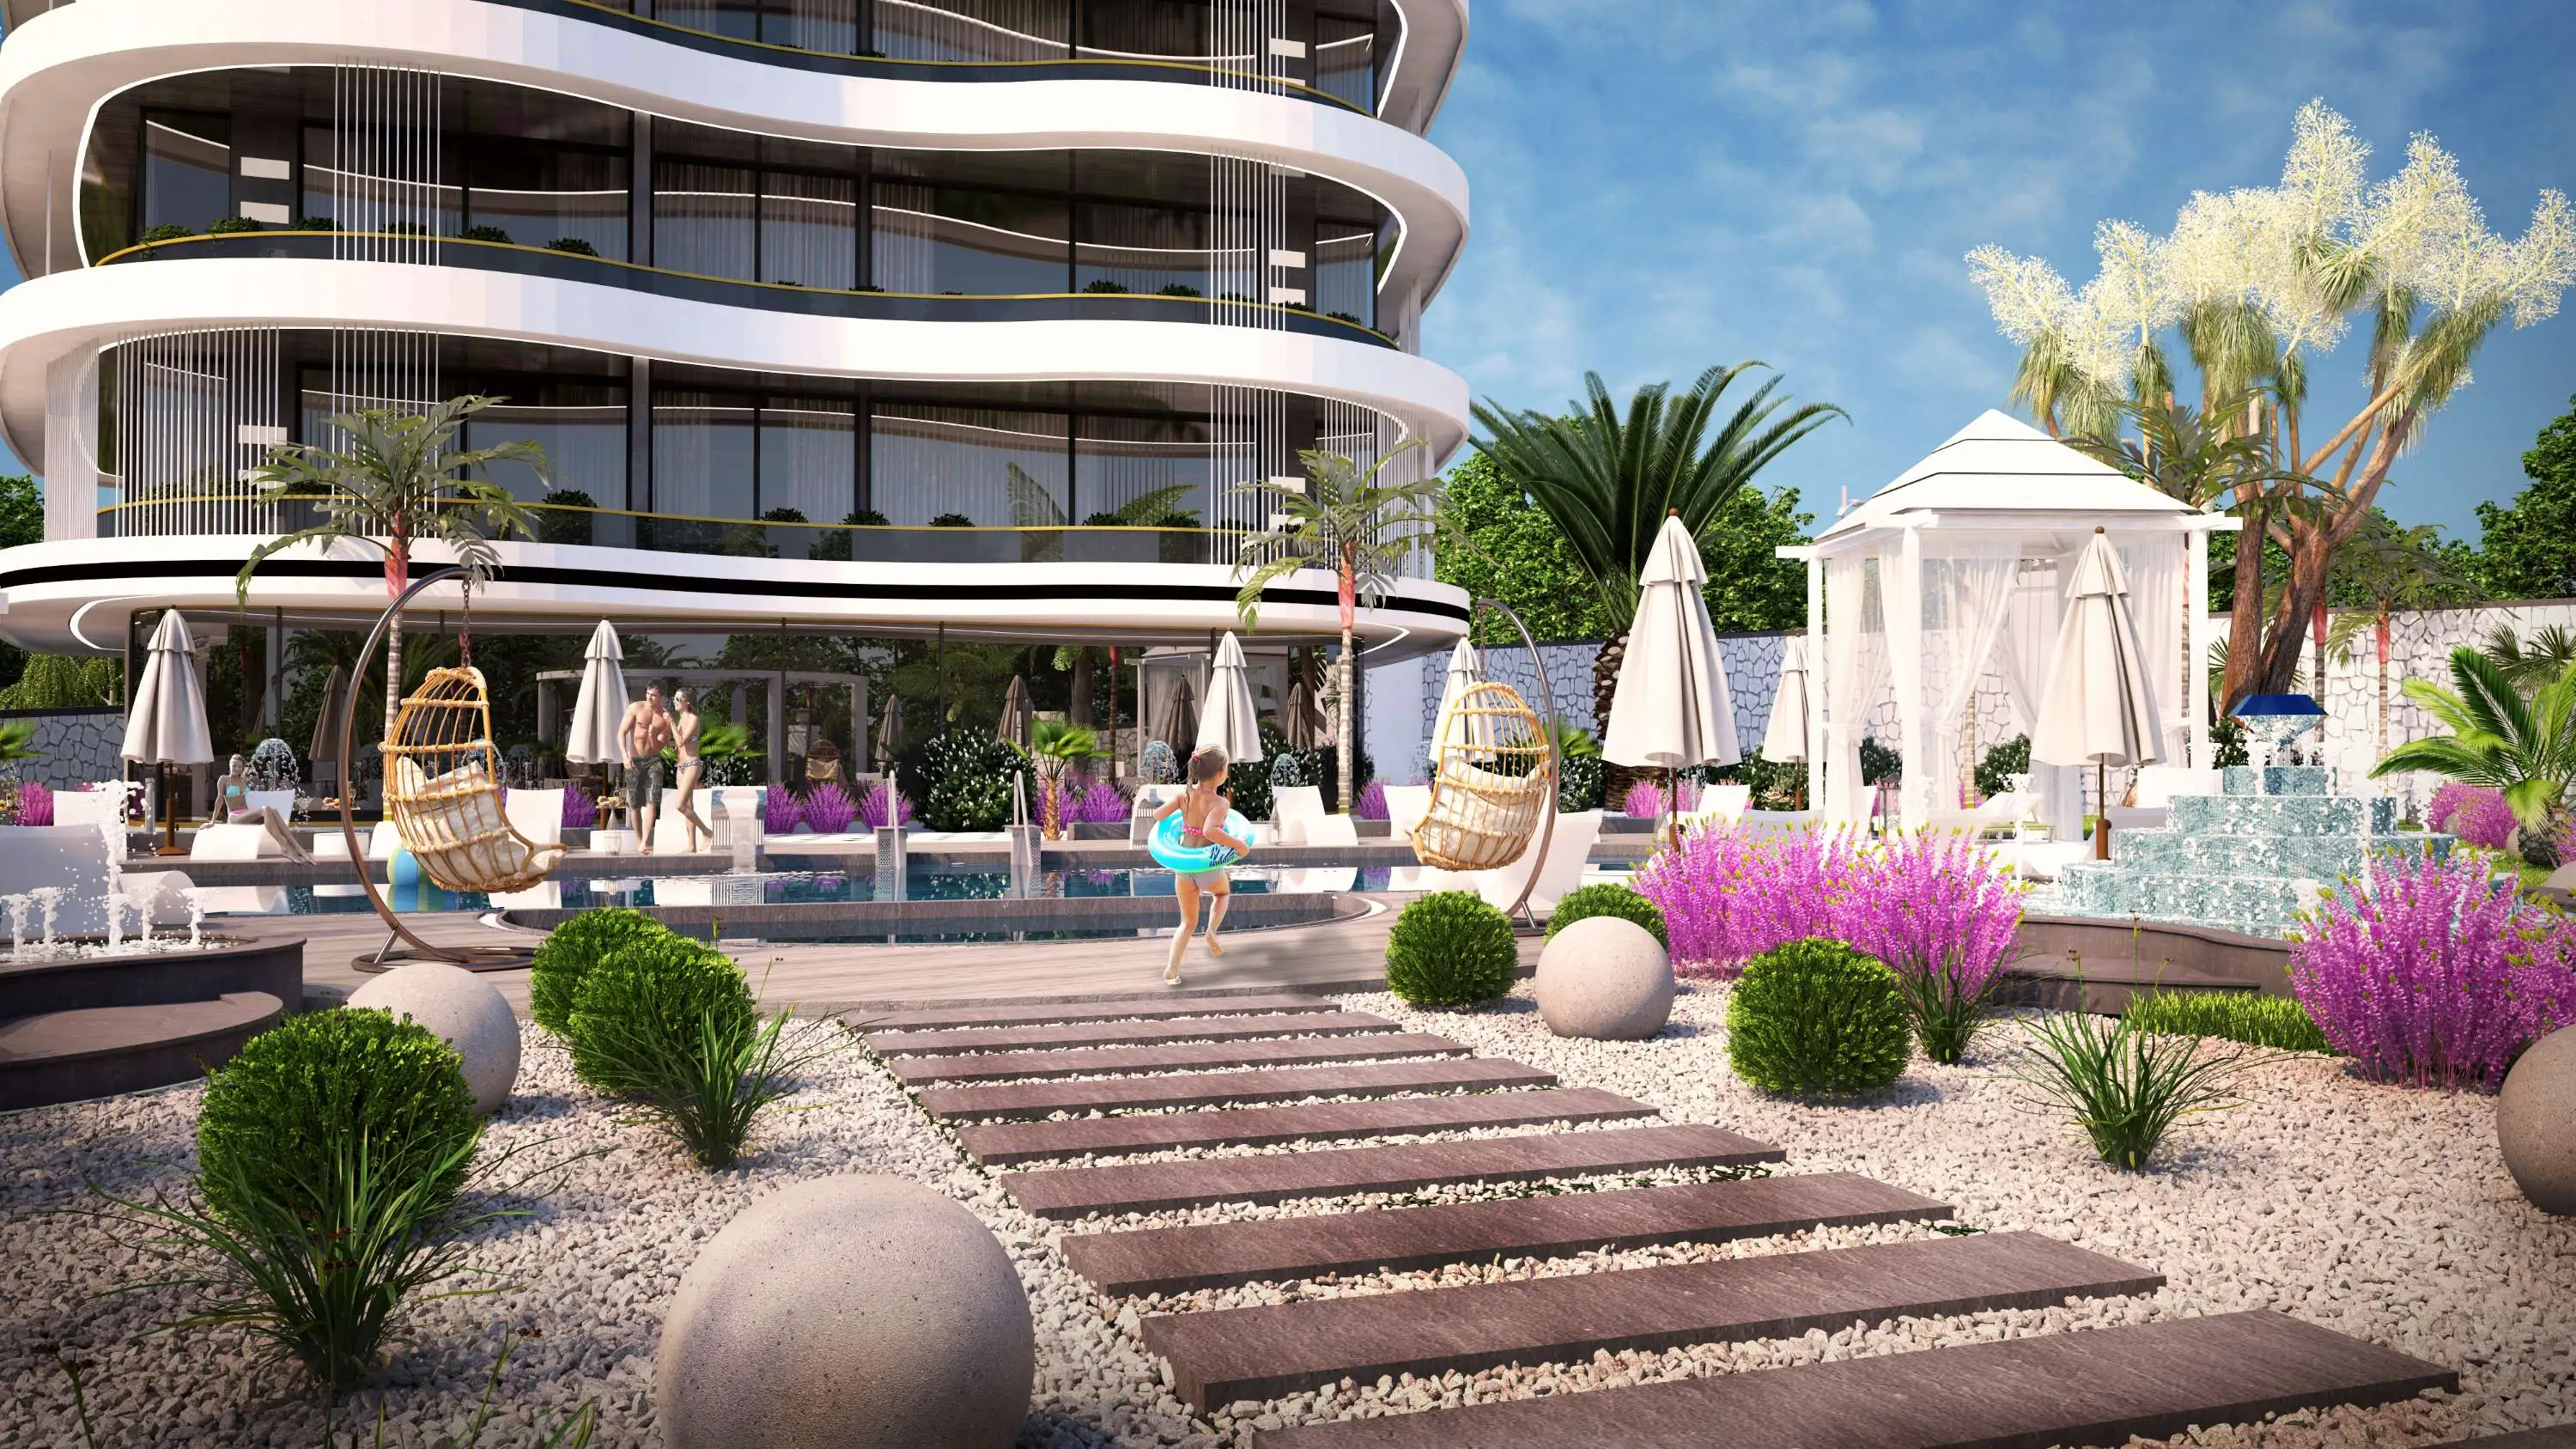 APARTMENTS IN EXCLUSIVE LUXURY PROJECT IN KARGICAK ALANYA